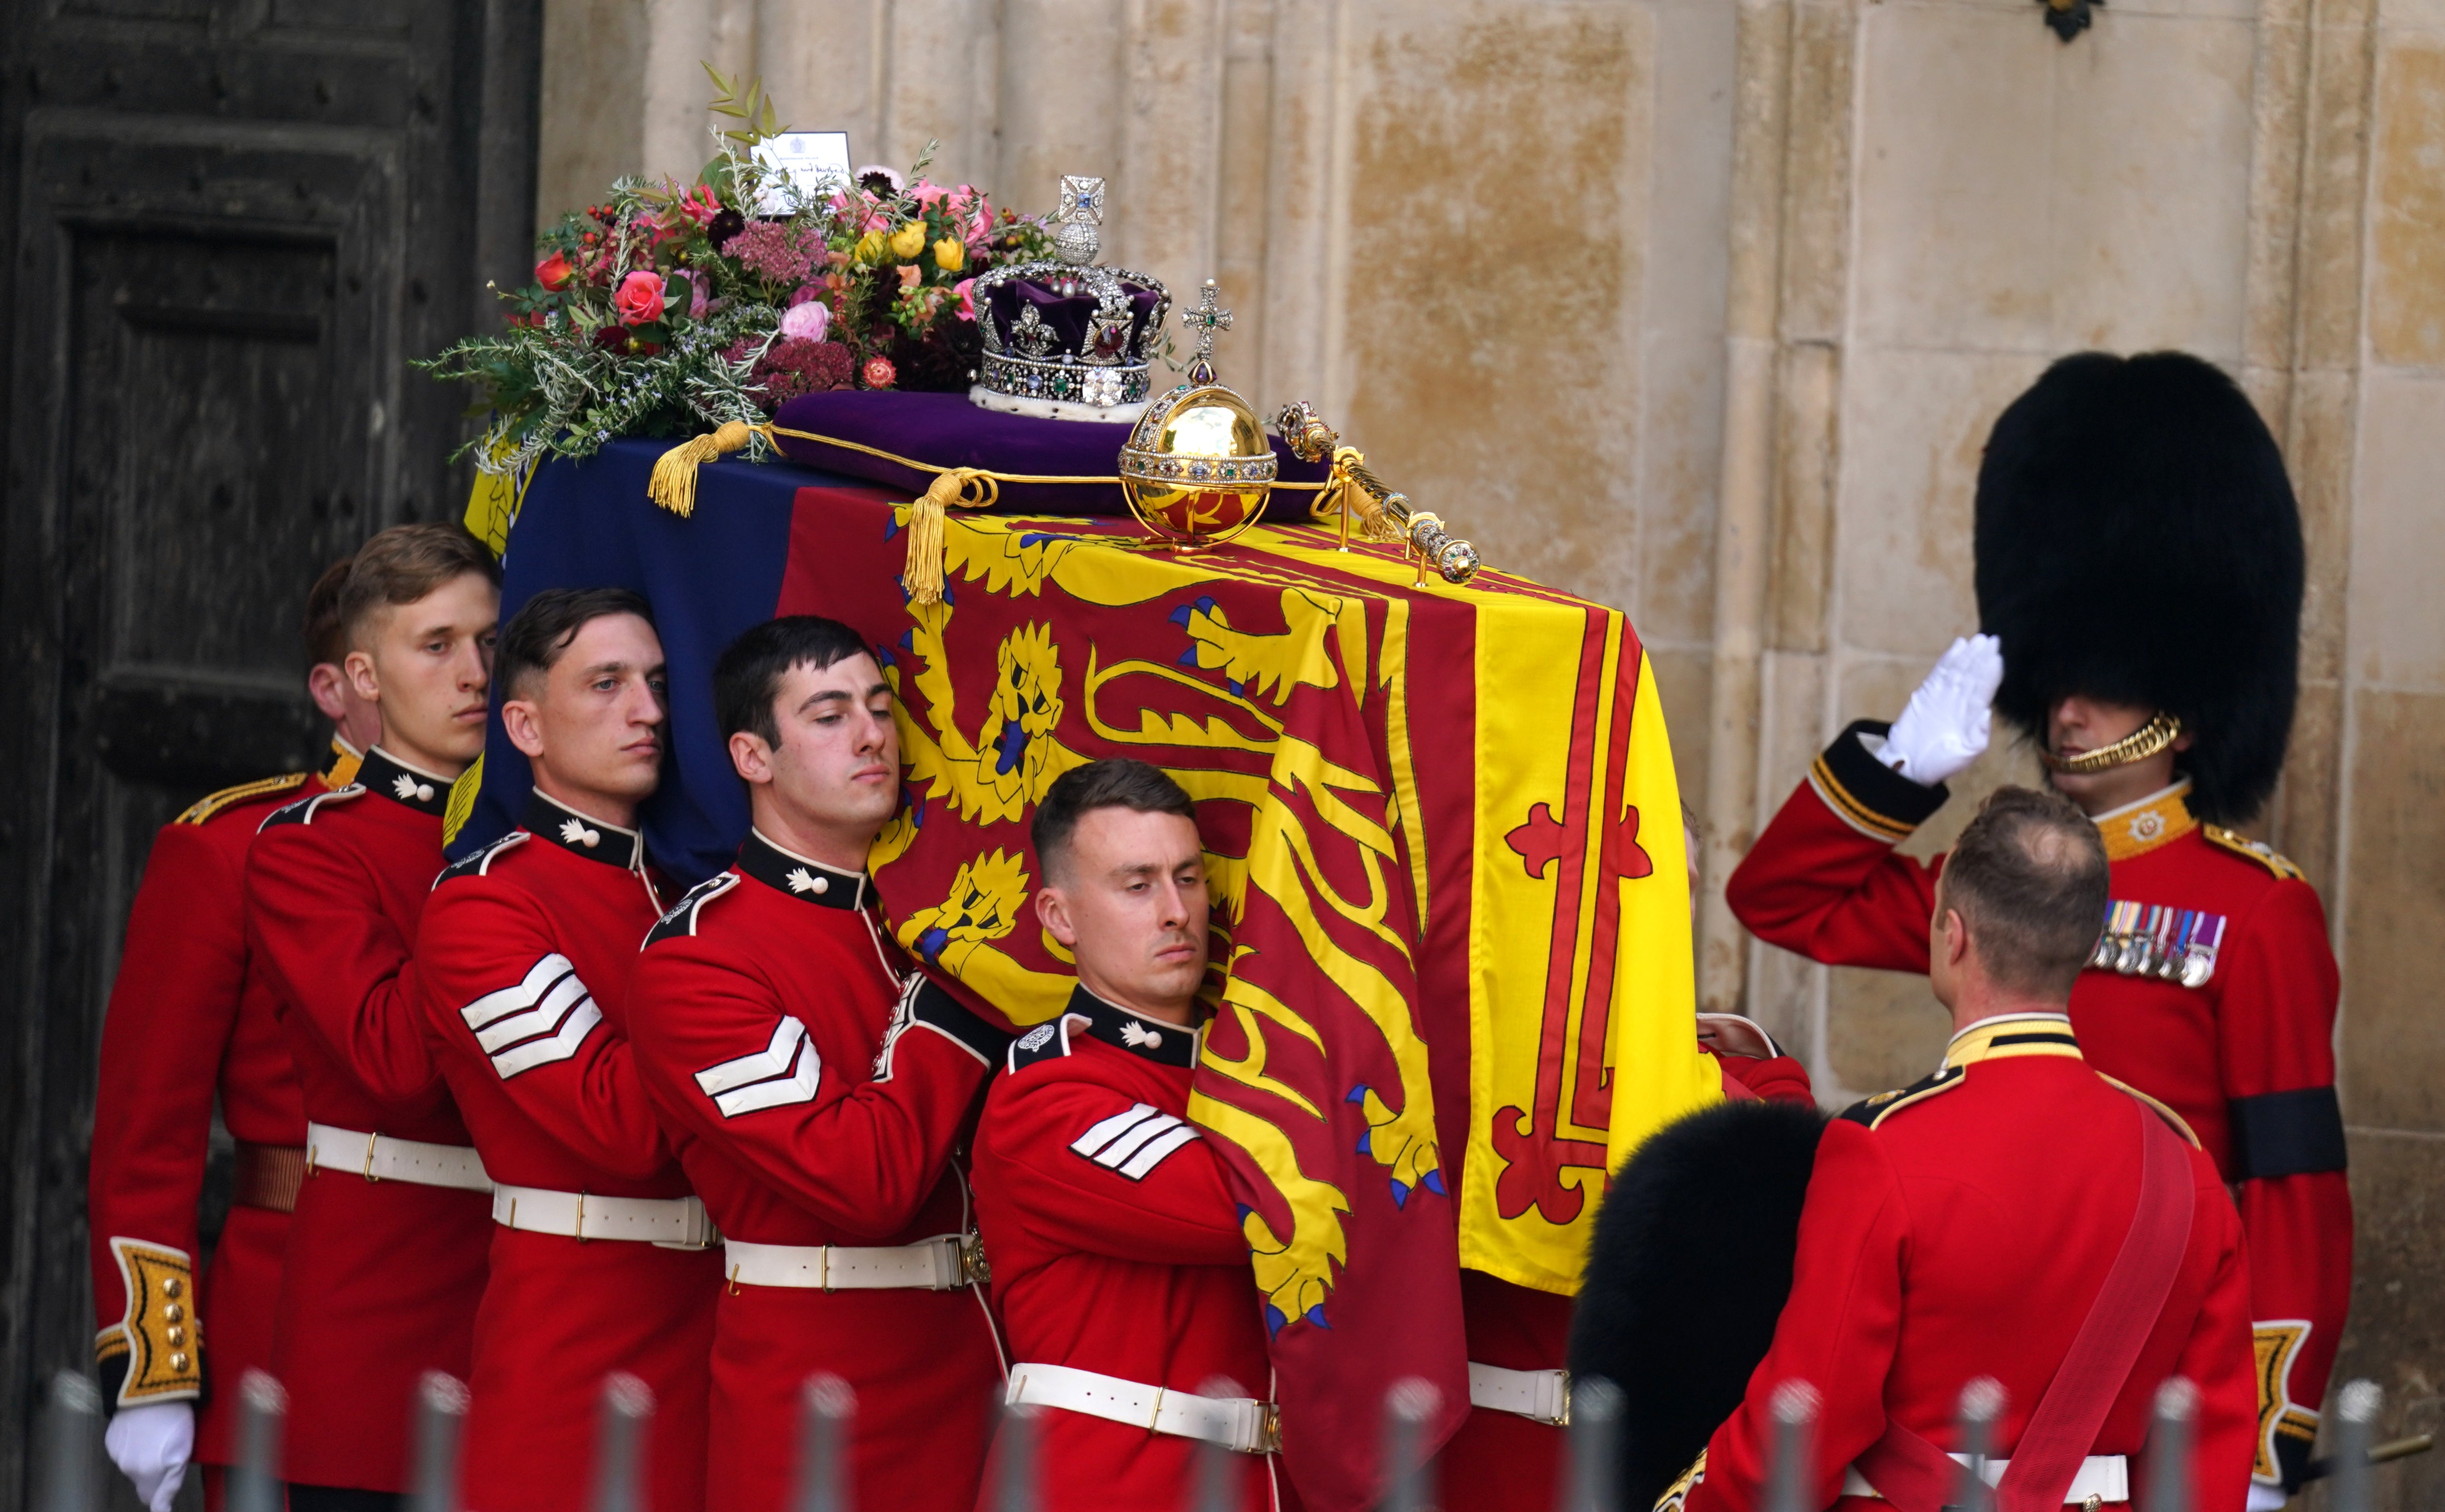 The Queen’s coffin leaves Westminster Abbey after the service (Andrew Milligan/PA)